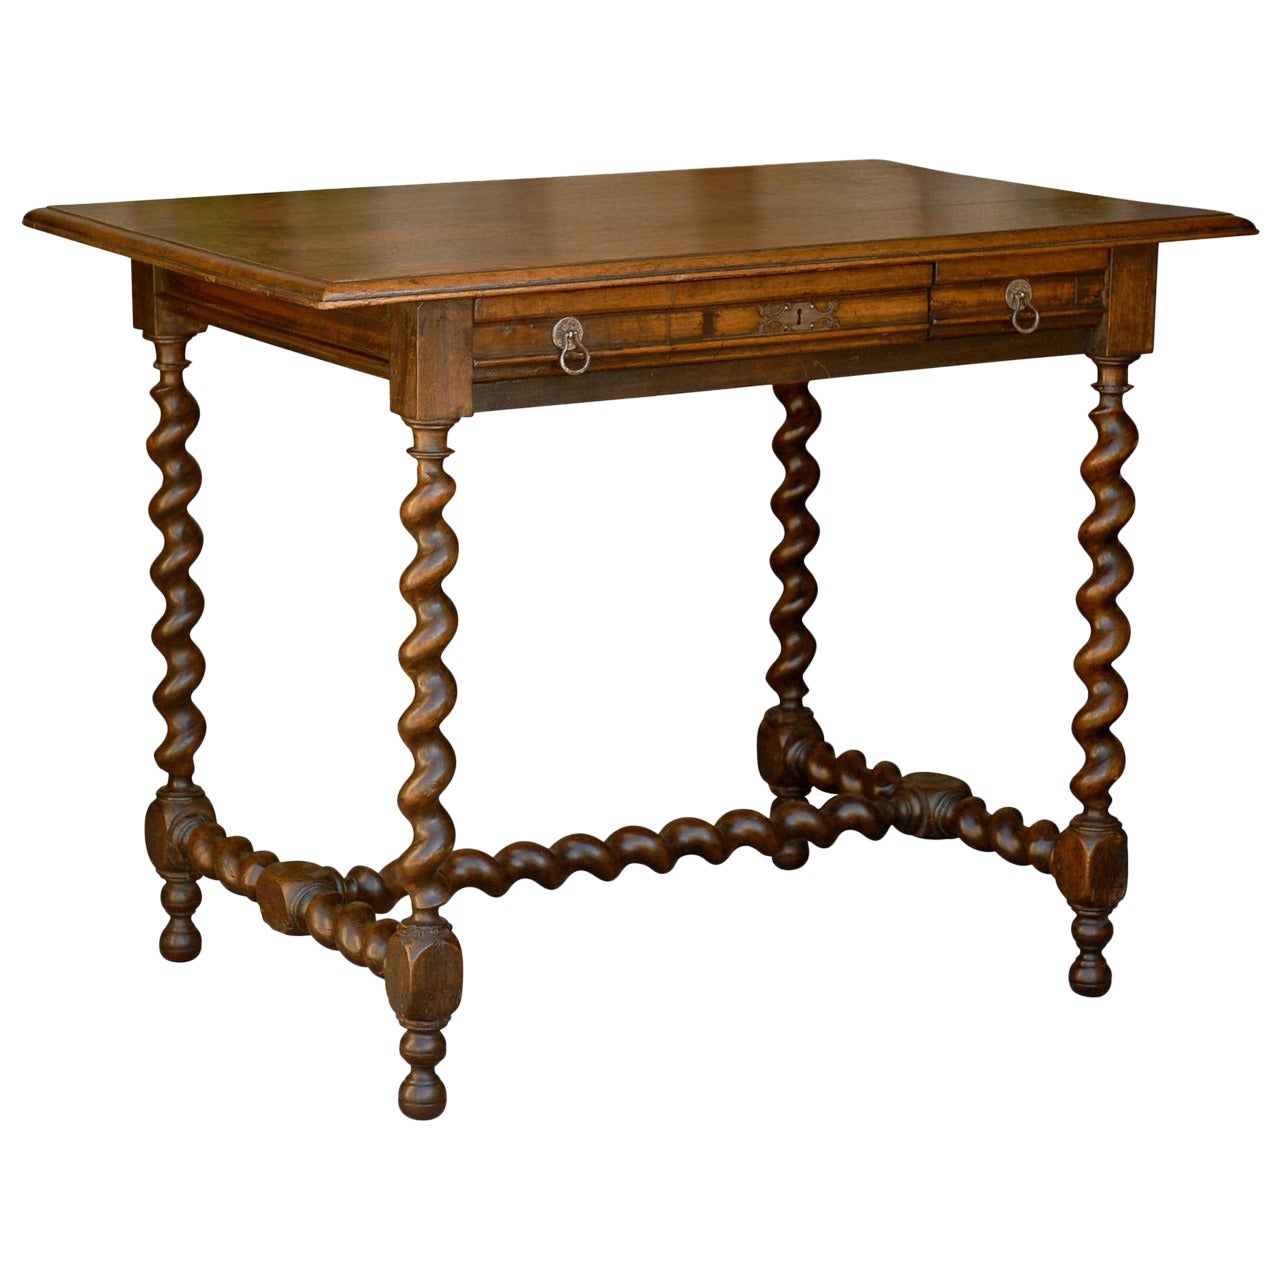 English 1870s Wooden Side Table with One Drawer, Barley Twist Legs and Stretcher